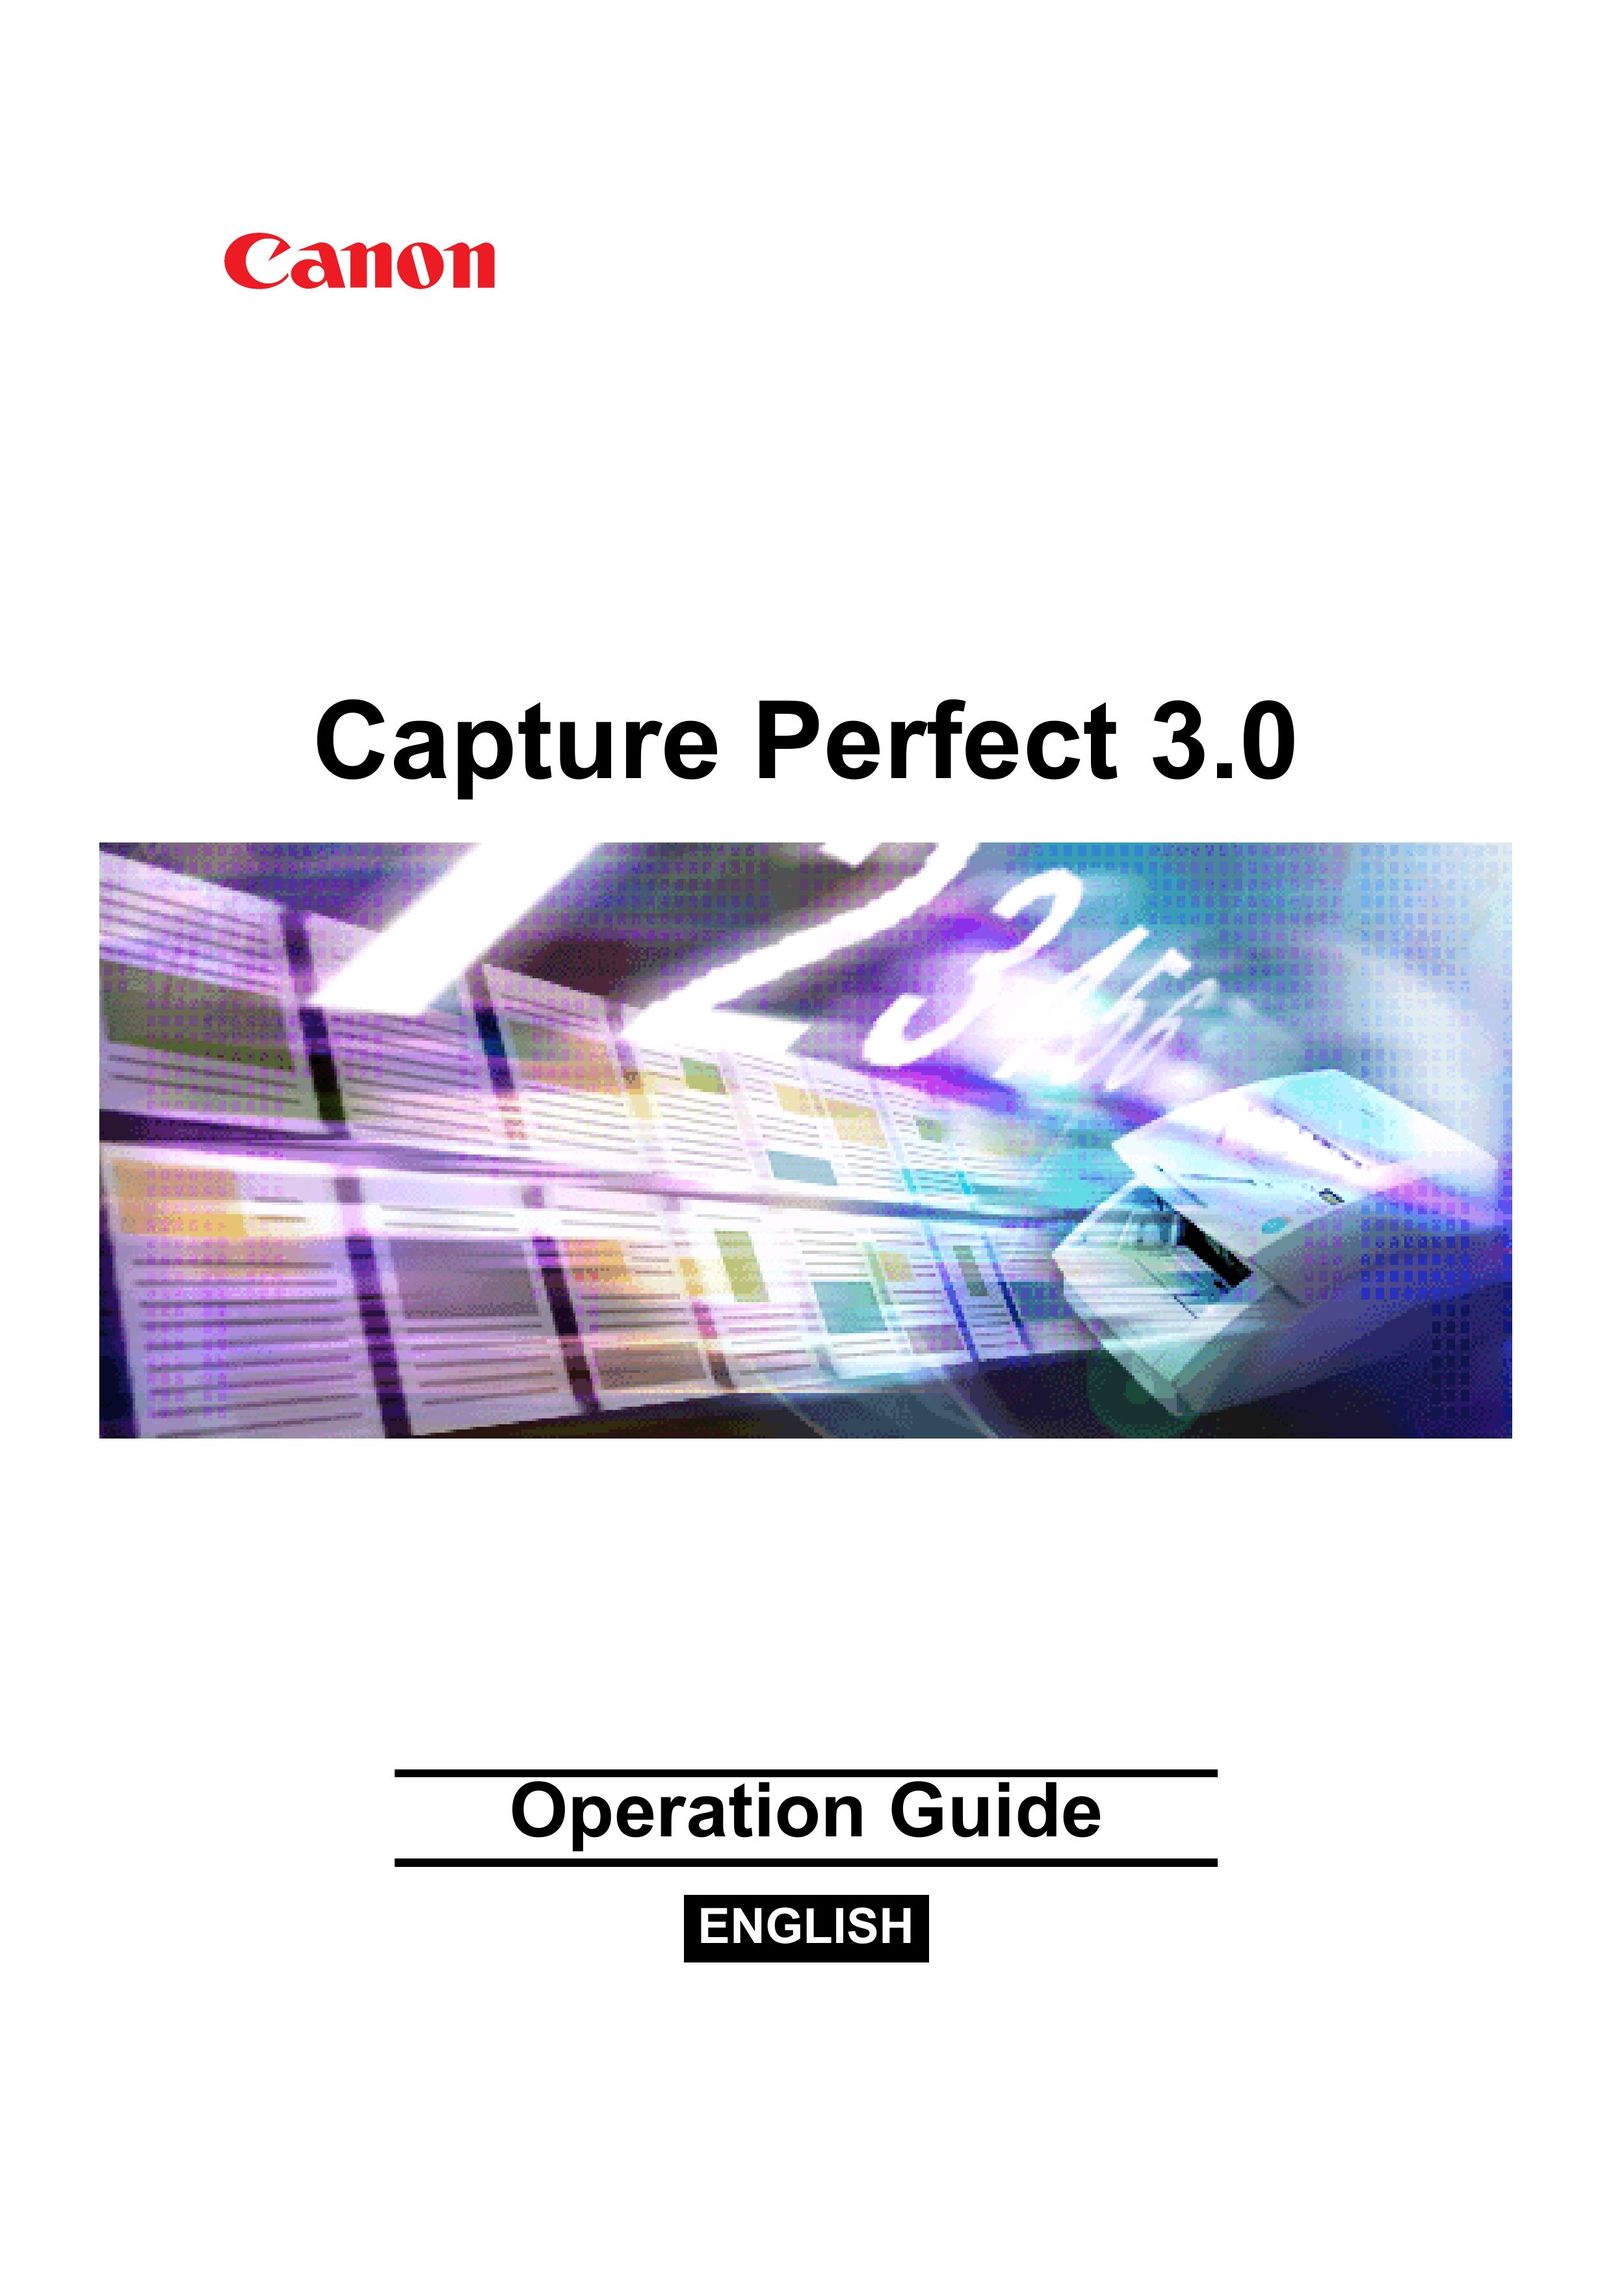 Canon Capture Perfect 3.0 Scanner User Manual